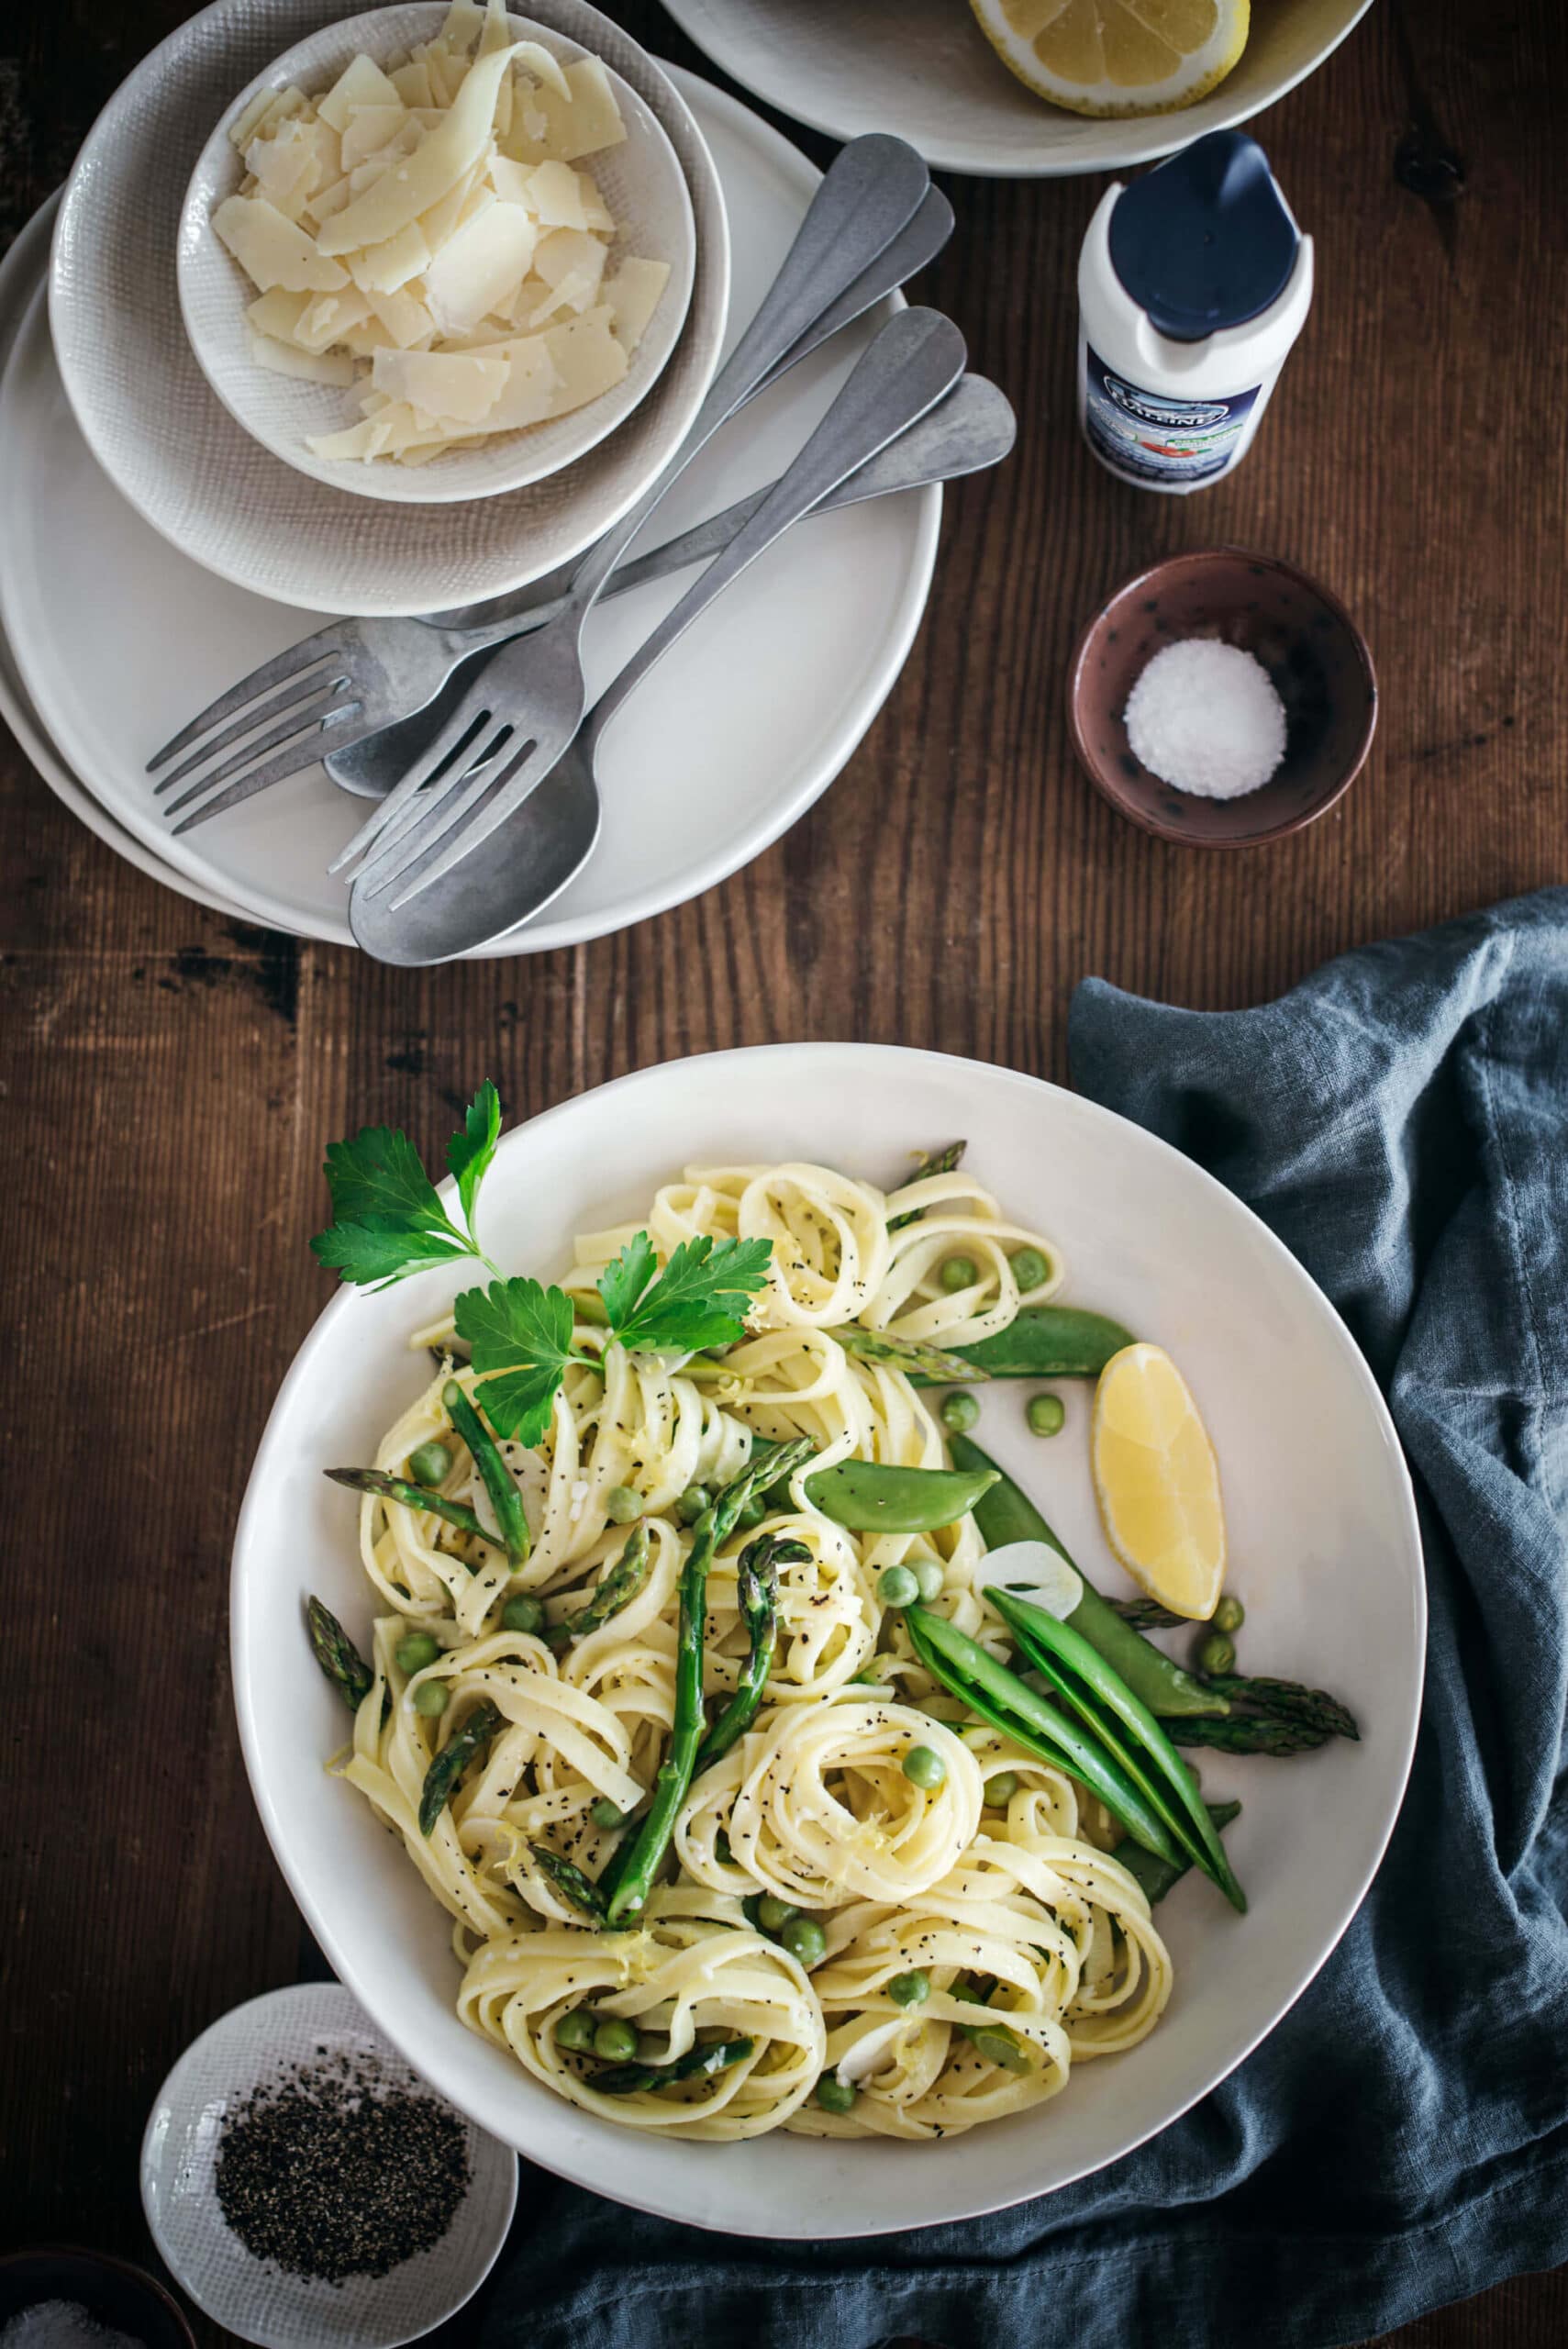 Peas and Asparagus pasta recipe - how to plating a meal